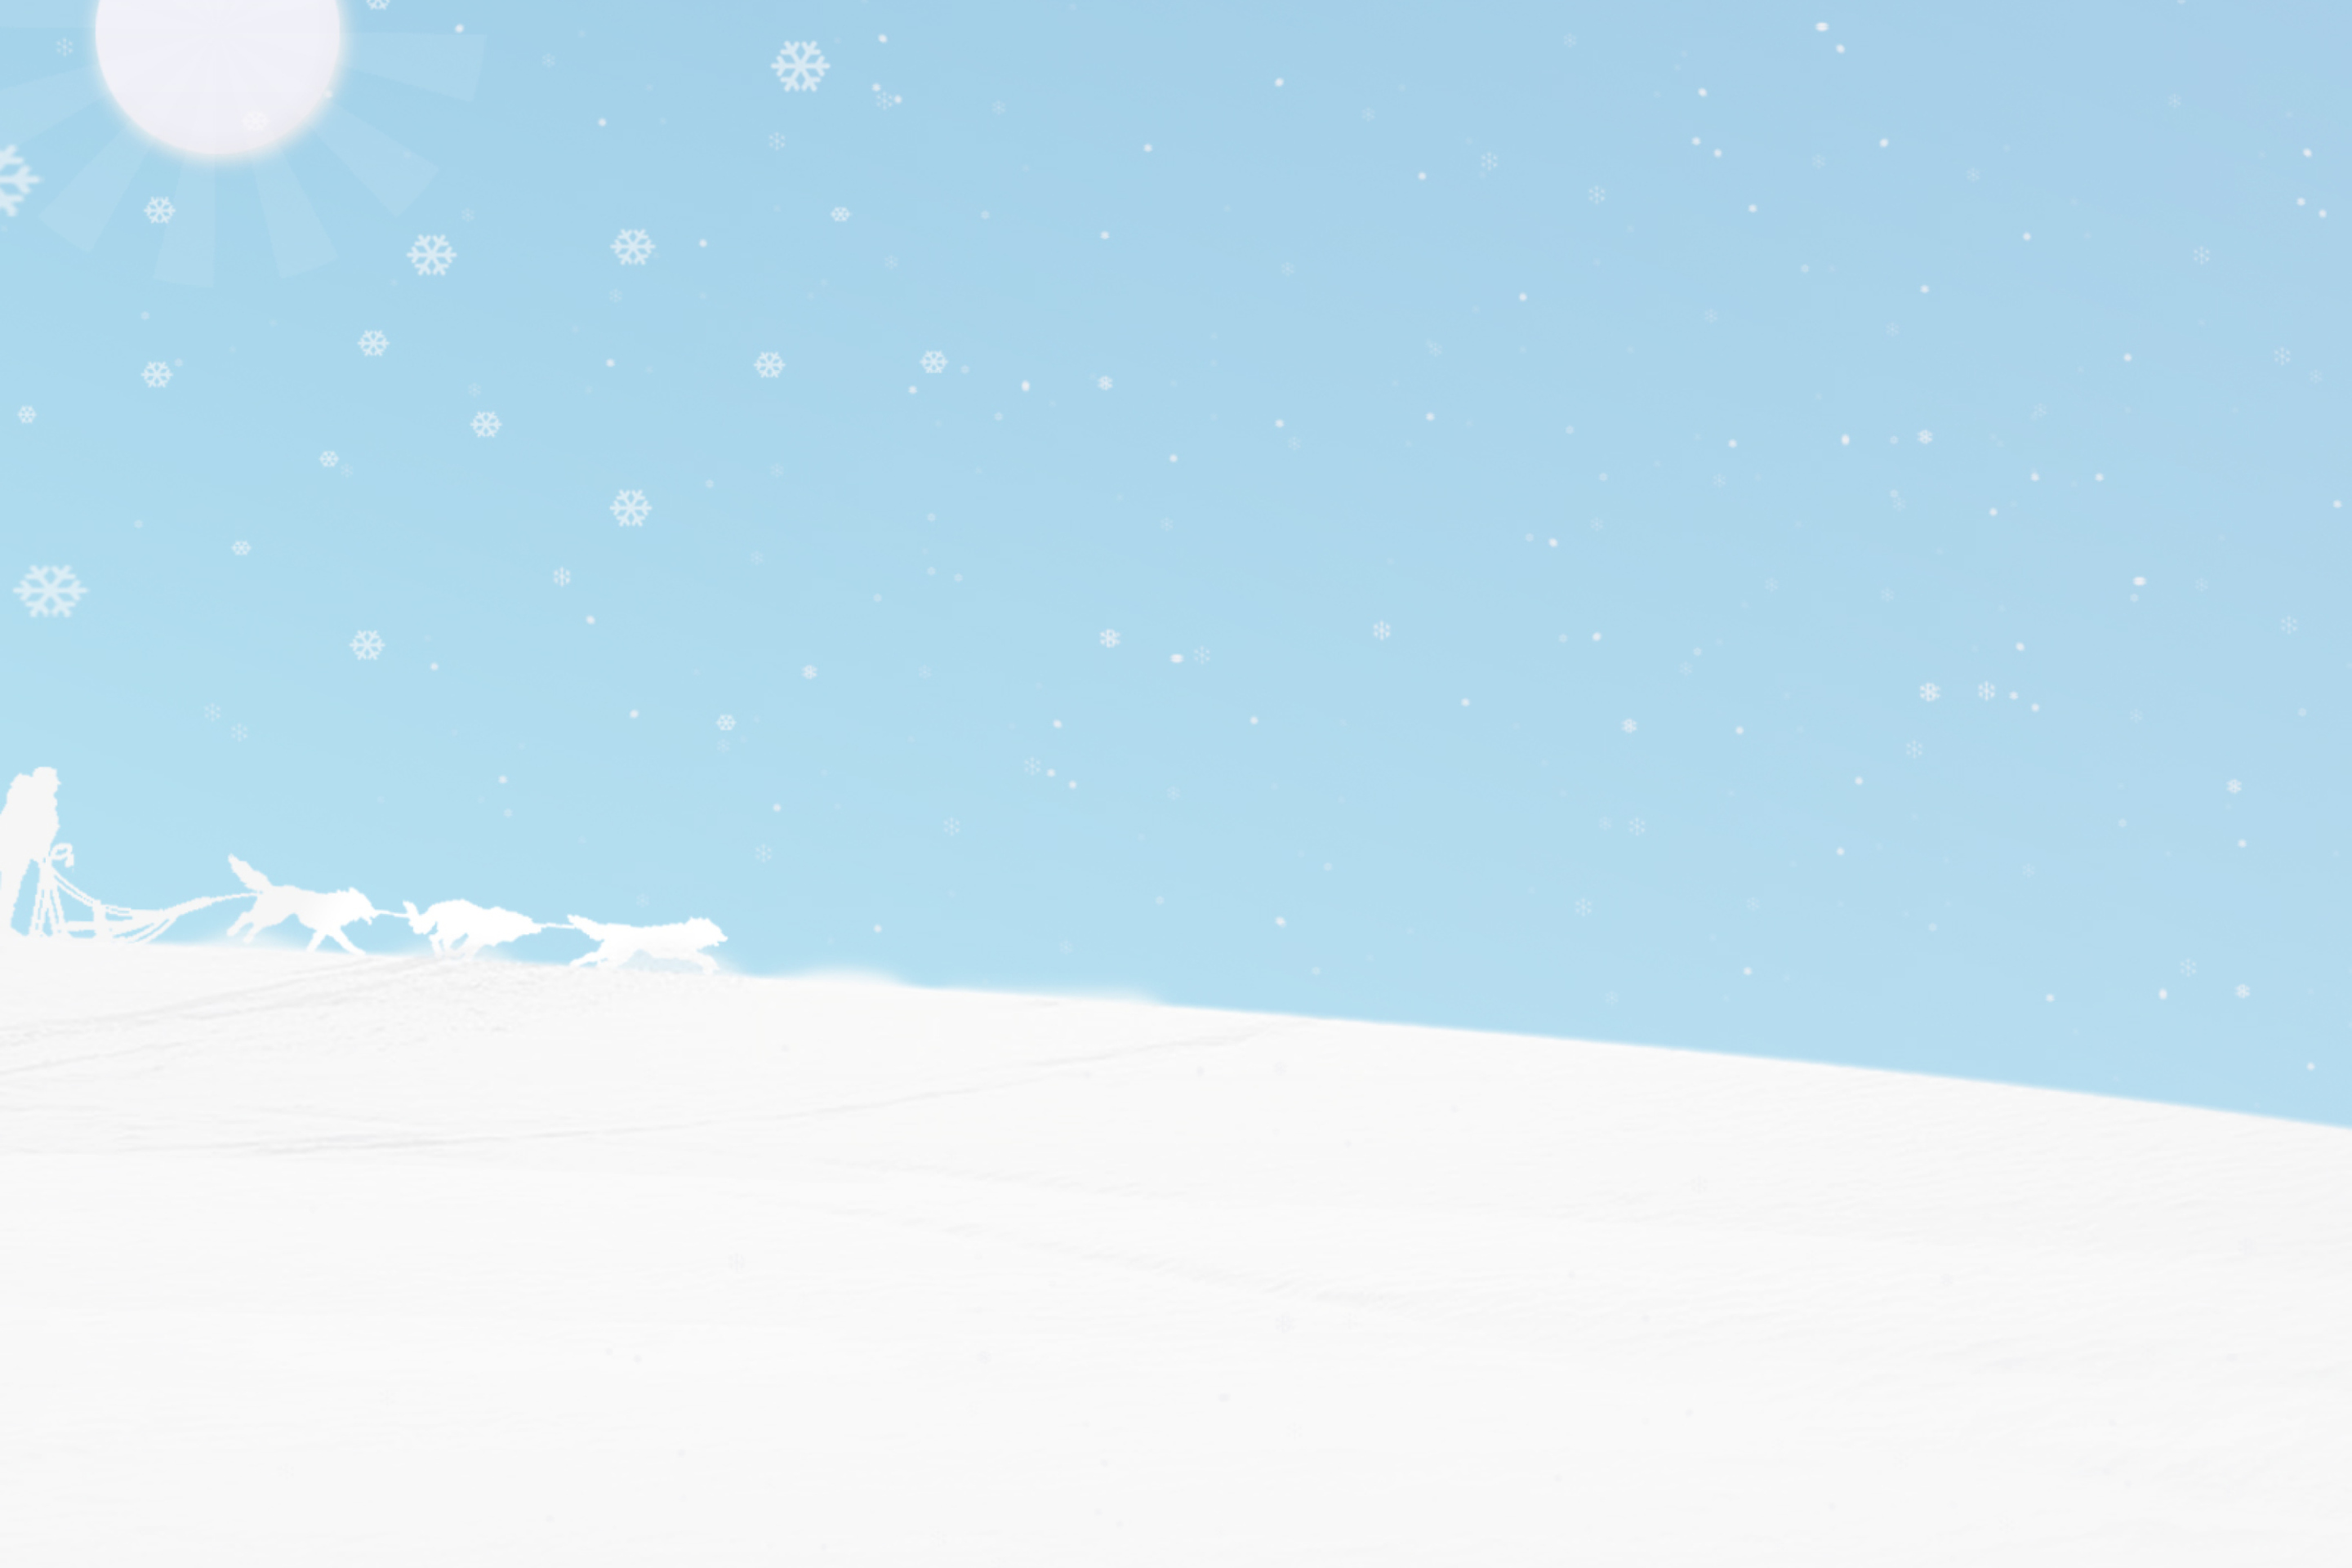 Winter White And Blue wallpaper 2880x1920